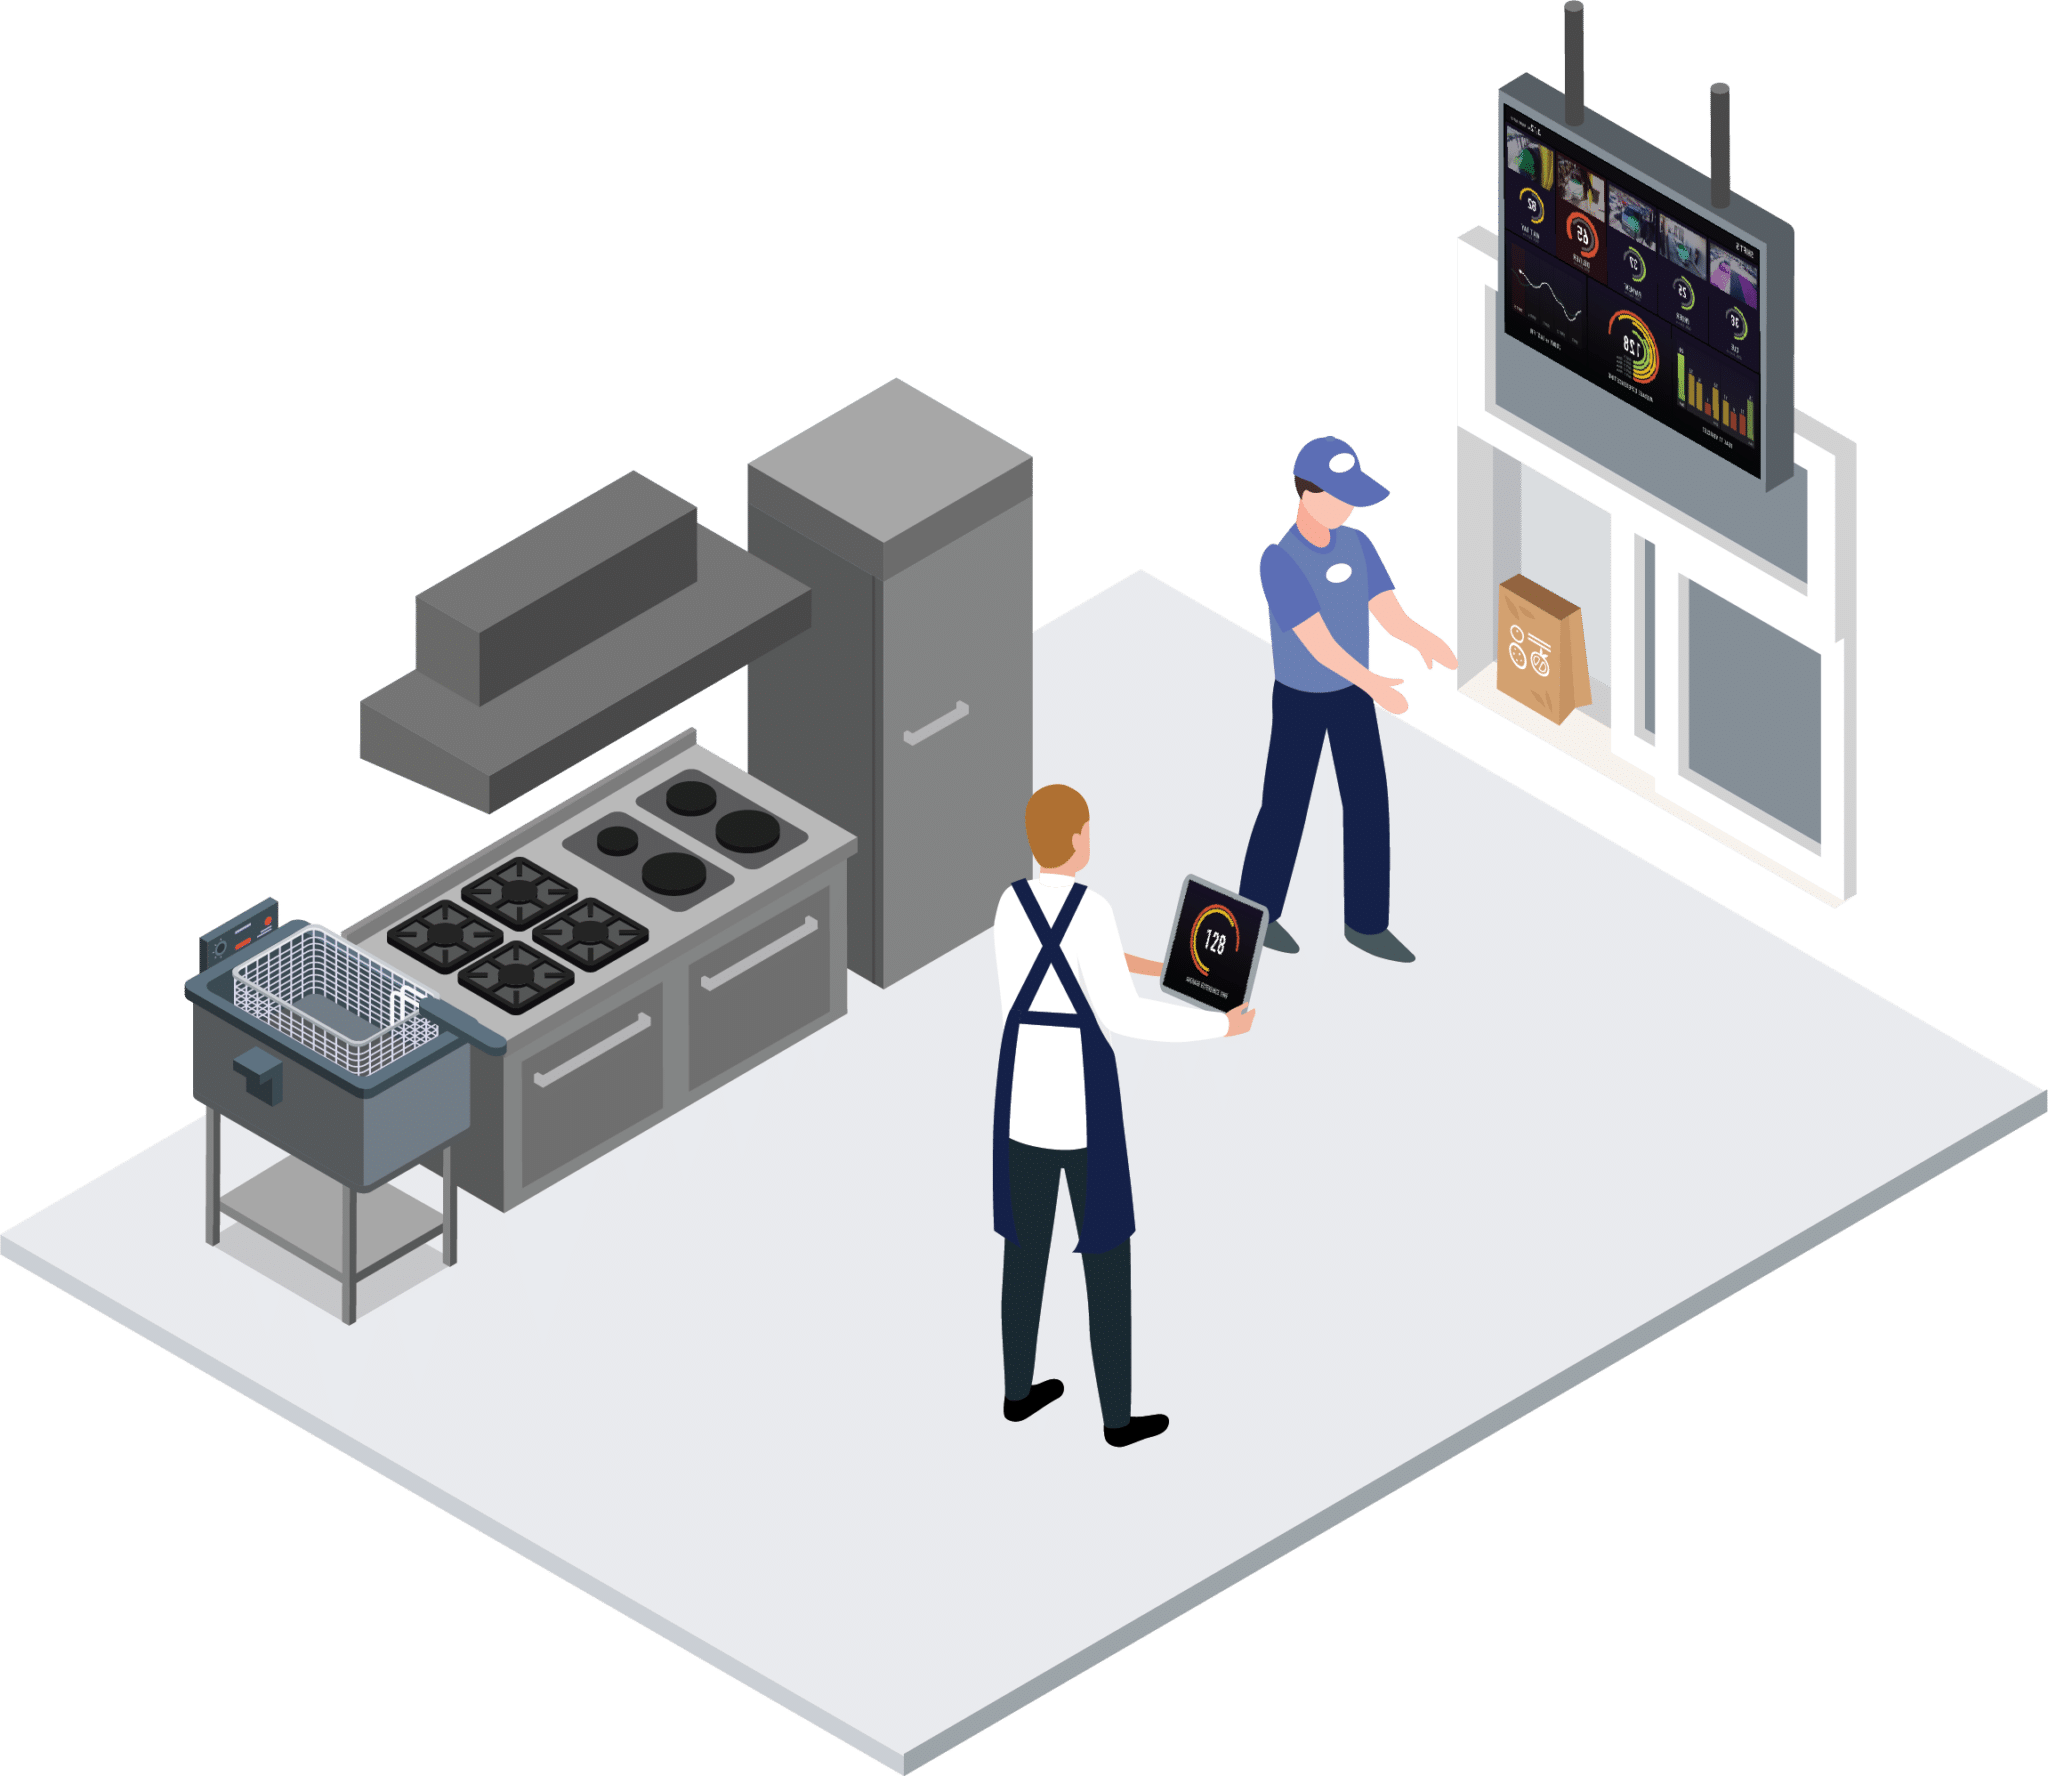 Illustration of the kitchen of a quick-service restaurant. There are appliances for making food, and a window though which servers can hand out orders that are ready. There is a worker holding a digital tablet, and a screen showing a dashboard with digital graphs at the top.